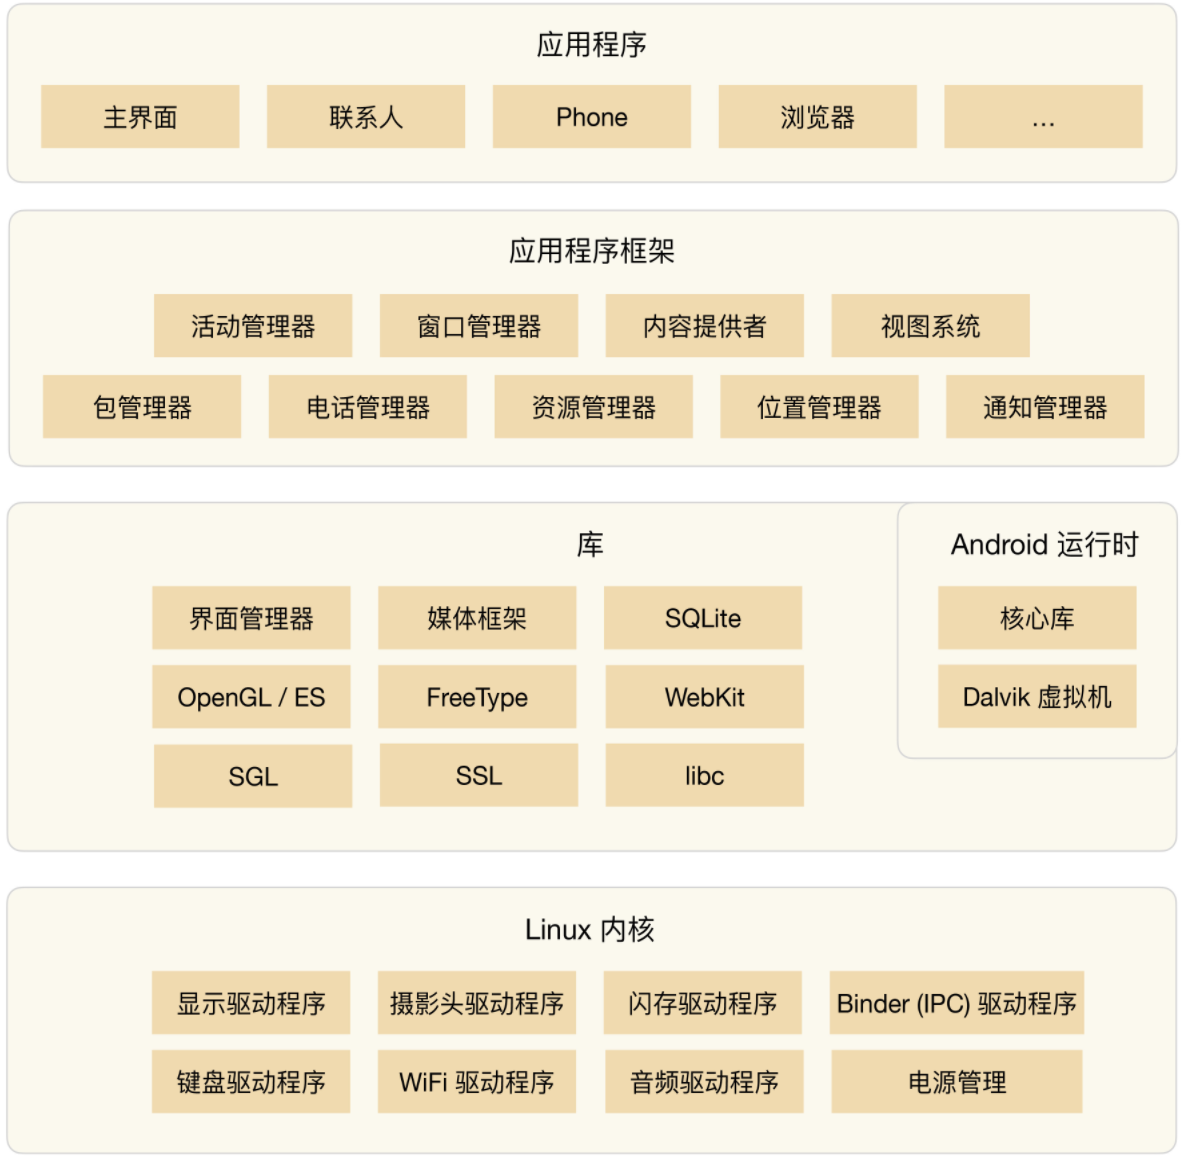 https://img.zhaoweiguo.com/knowledge/images/architectures/expandabilitys/hierarchical1.png